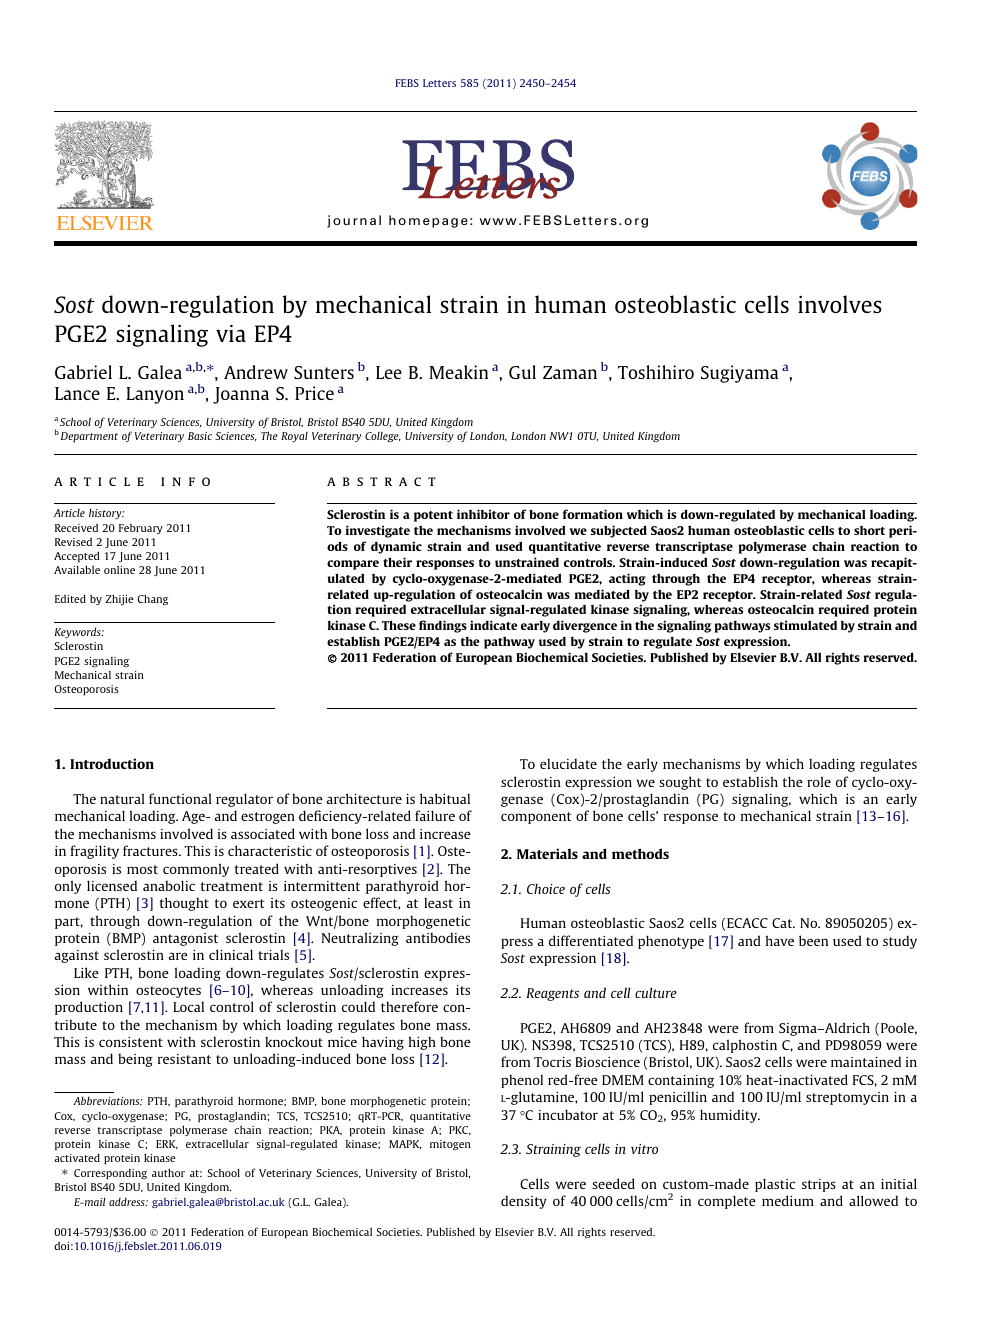 Sost Down Regulation By Mechanical Strain In Human Osteoblastic Cells Involves Pge2 Signaling Via Ep4 Topic Of Research Paper In Basic Medicine Download Scholarly Article Pdf And Read For Free On Cyberleninka